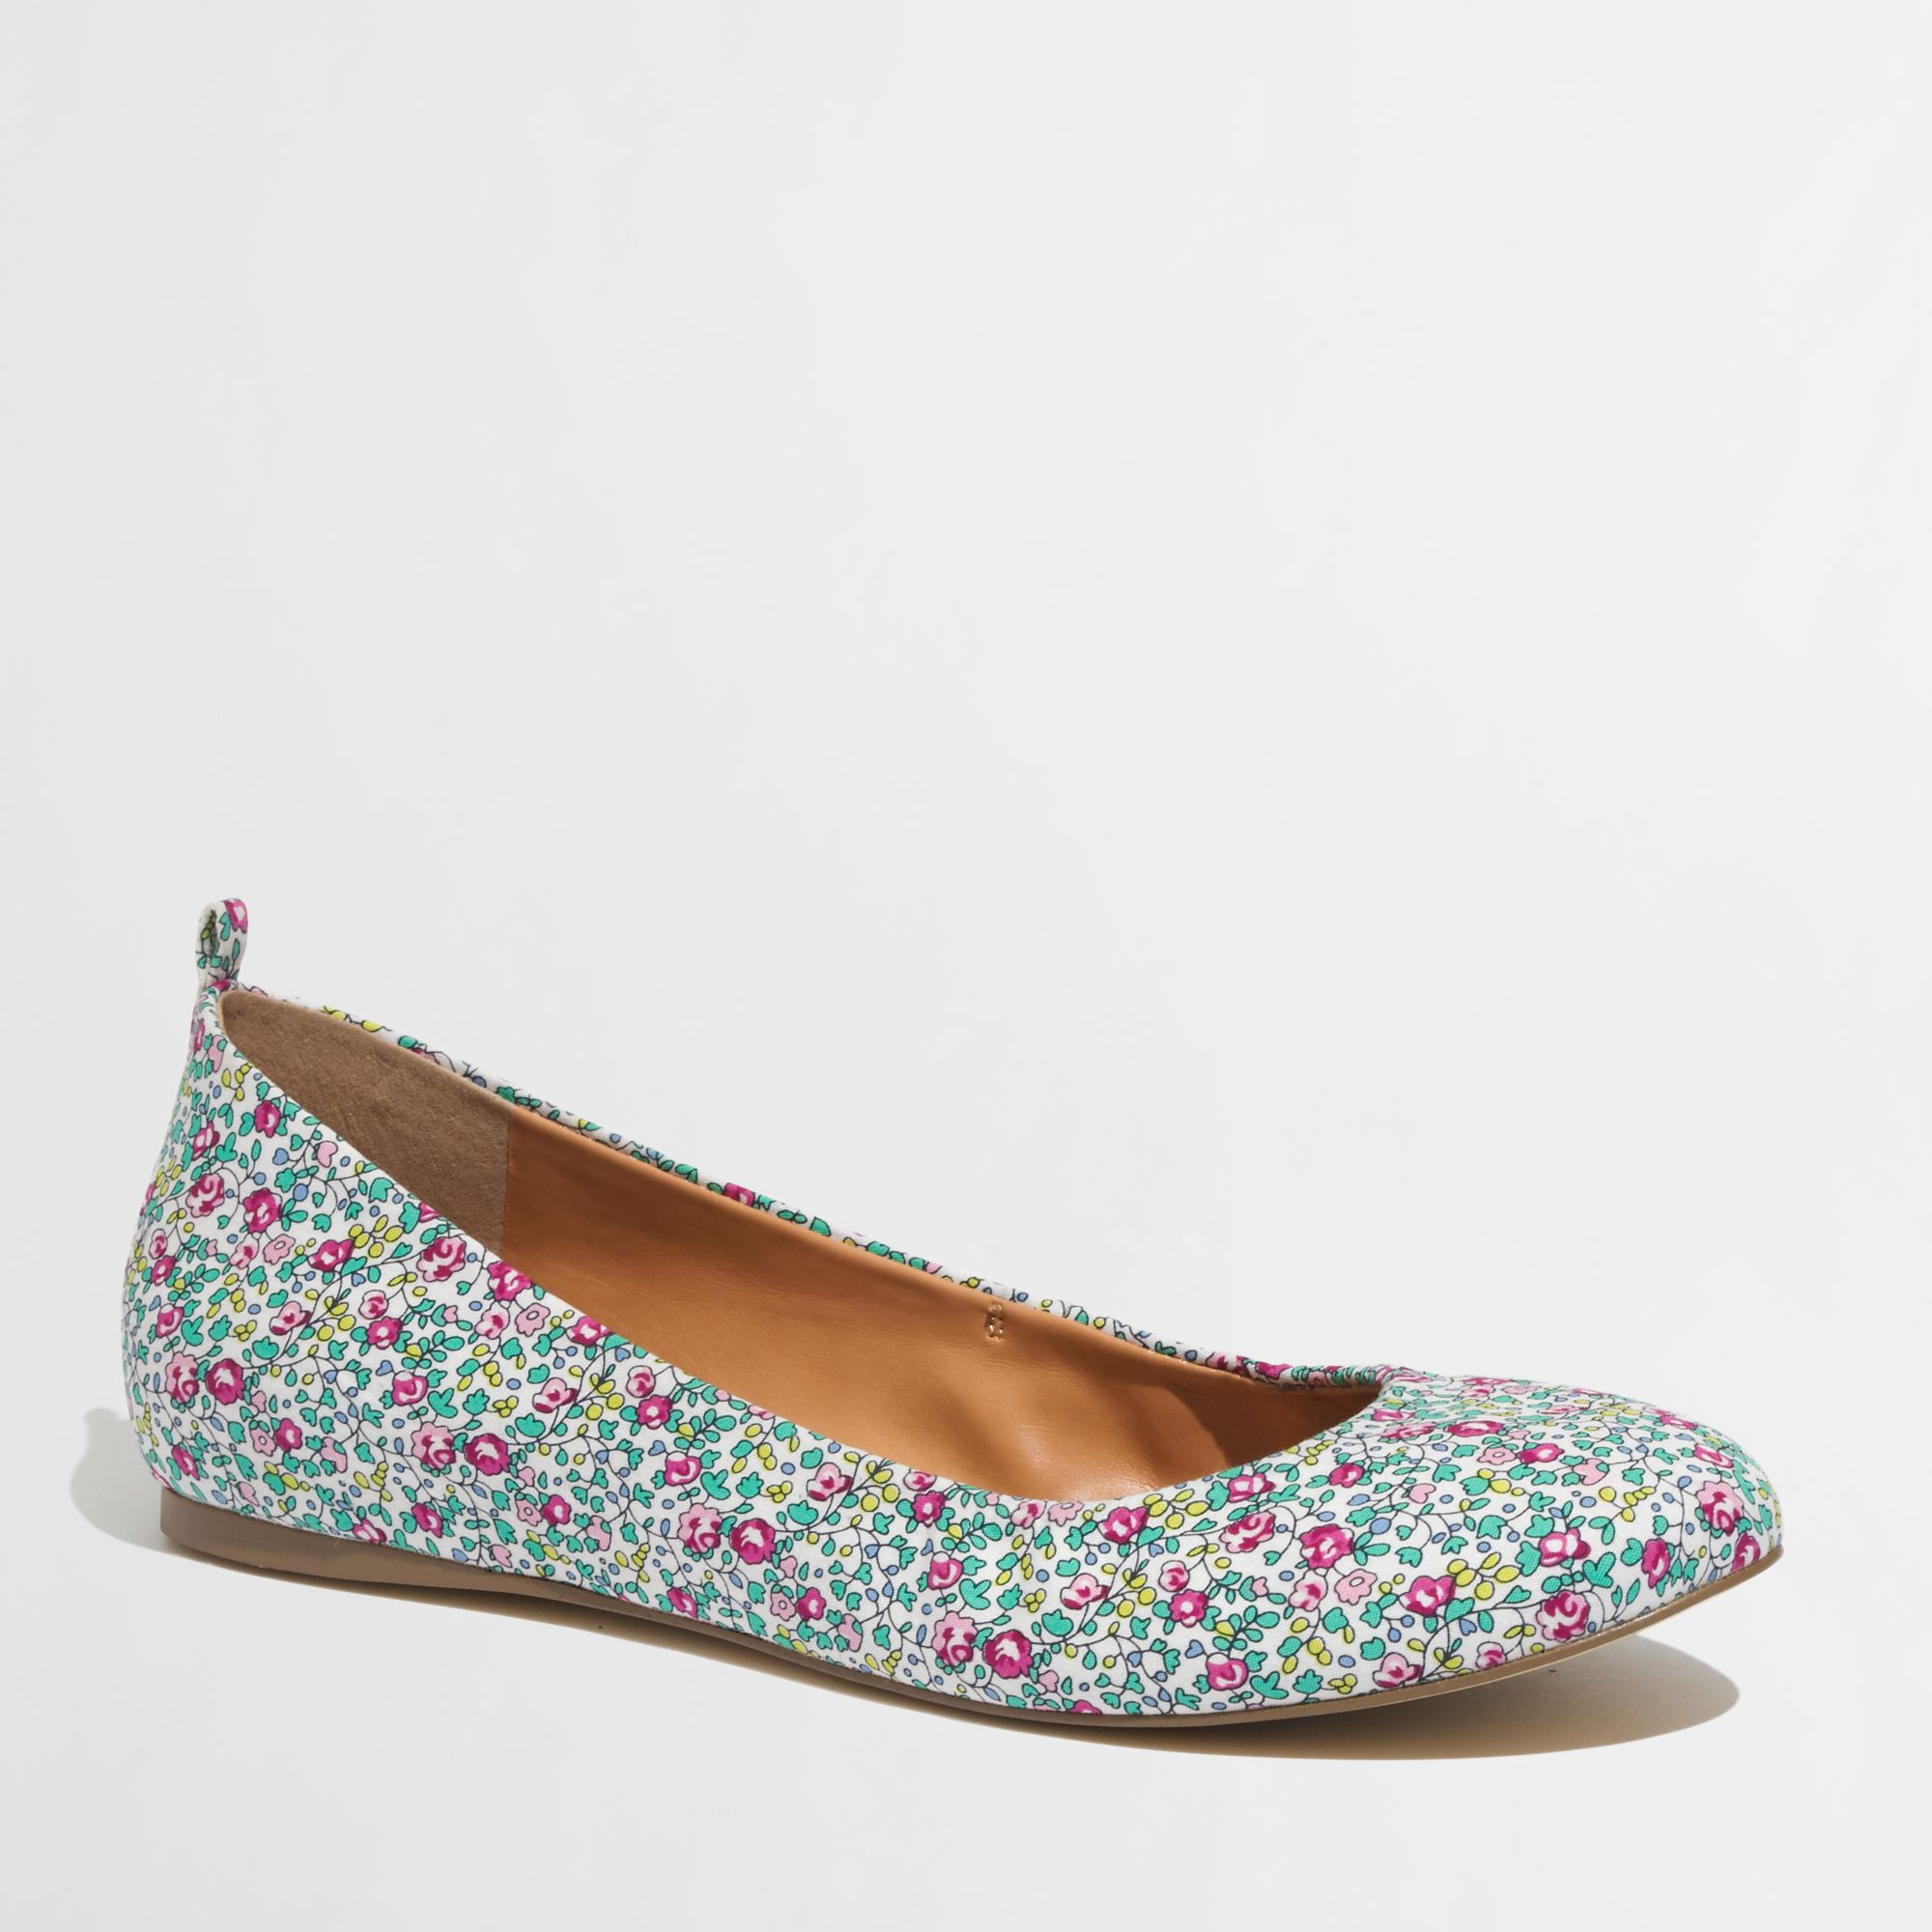 J.crew Factory Anya Printed Ballet Flats in Floral | Lyst